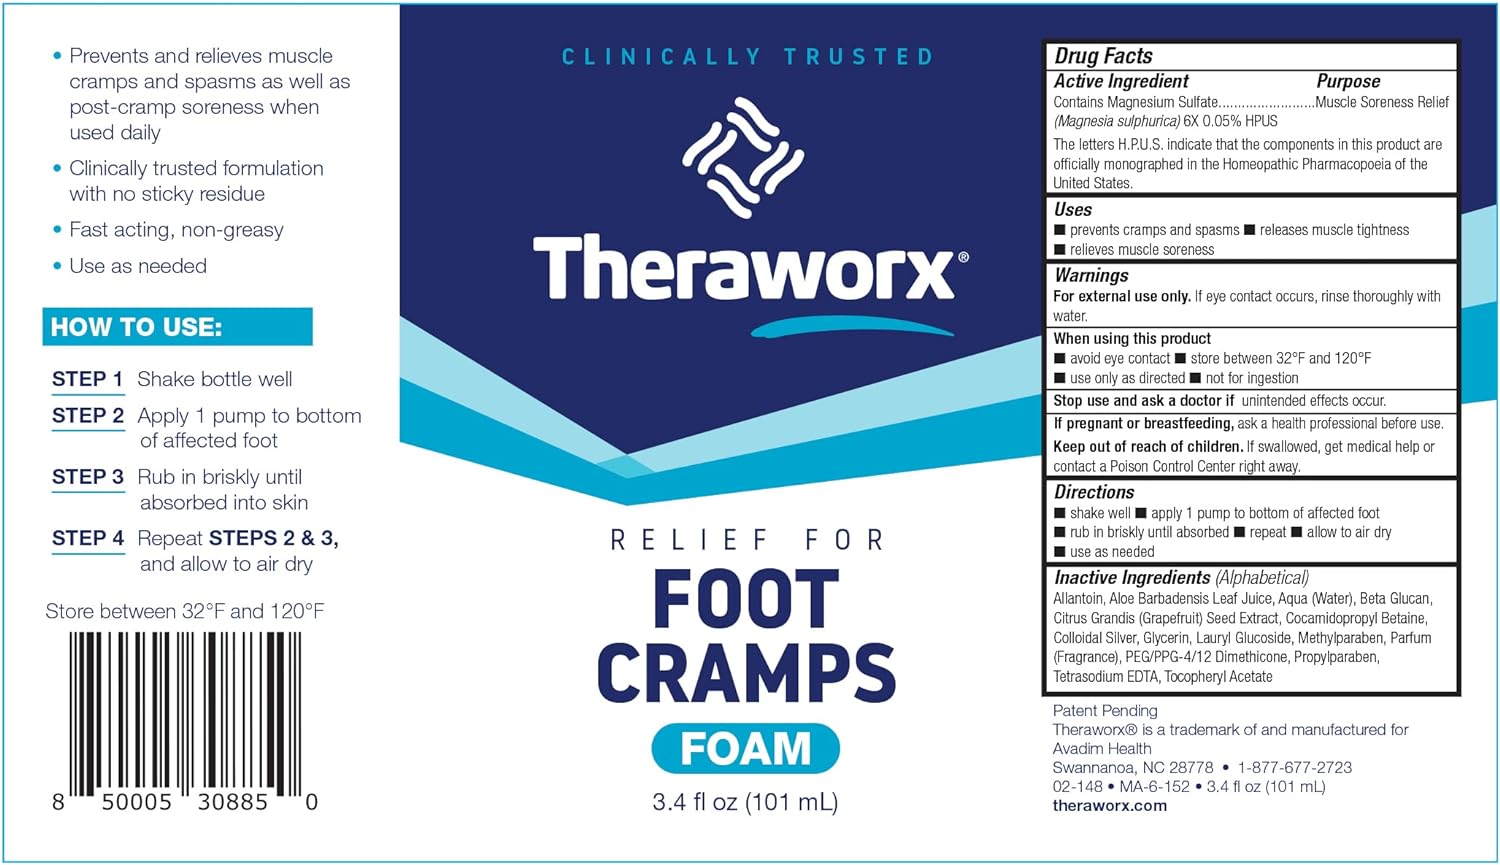 Theraworx Relief for Foot Cramps Foam Fast-Acting Foot Cramps, Spasms, Soreness Relief - 3.4 oz - 1 Count : Health & Household